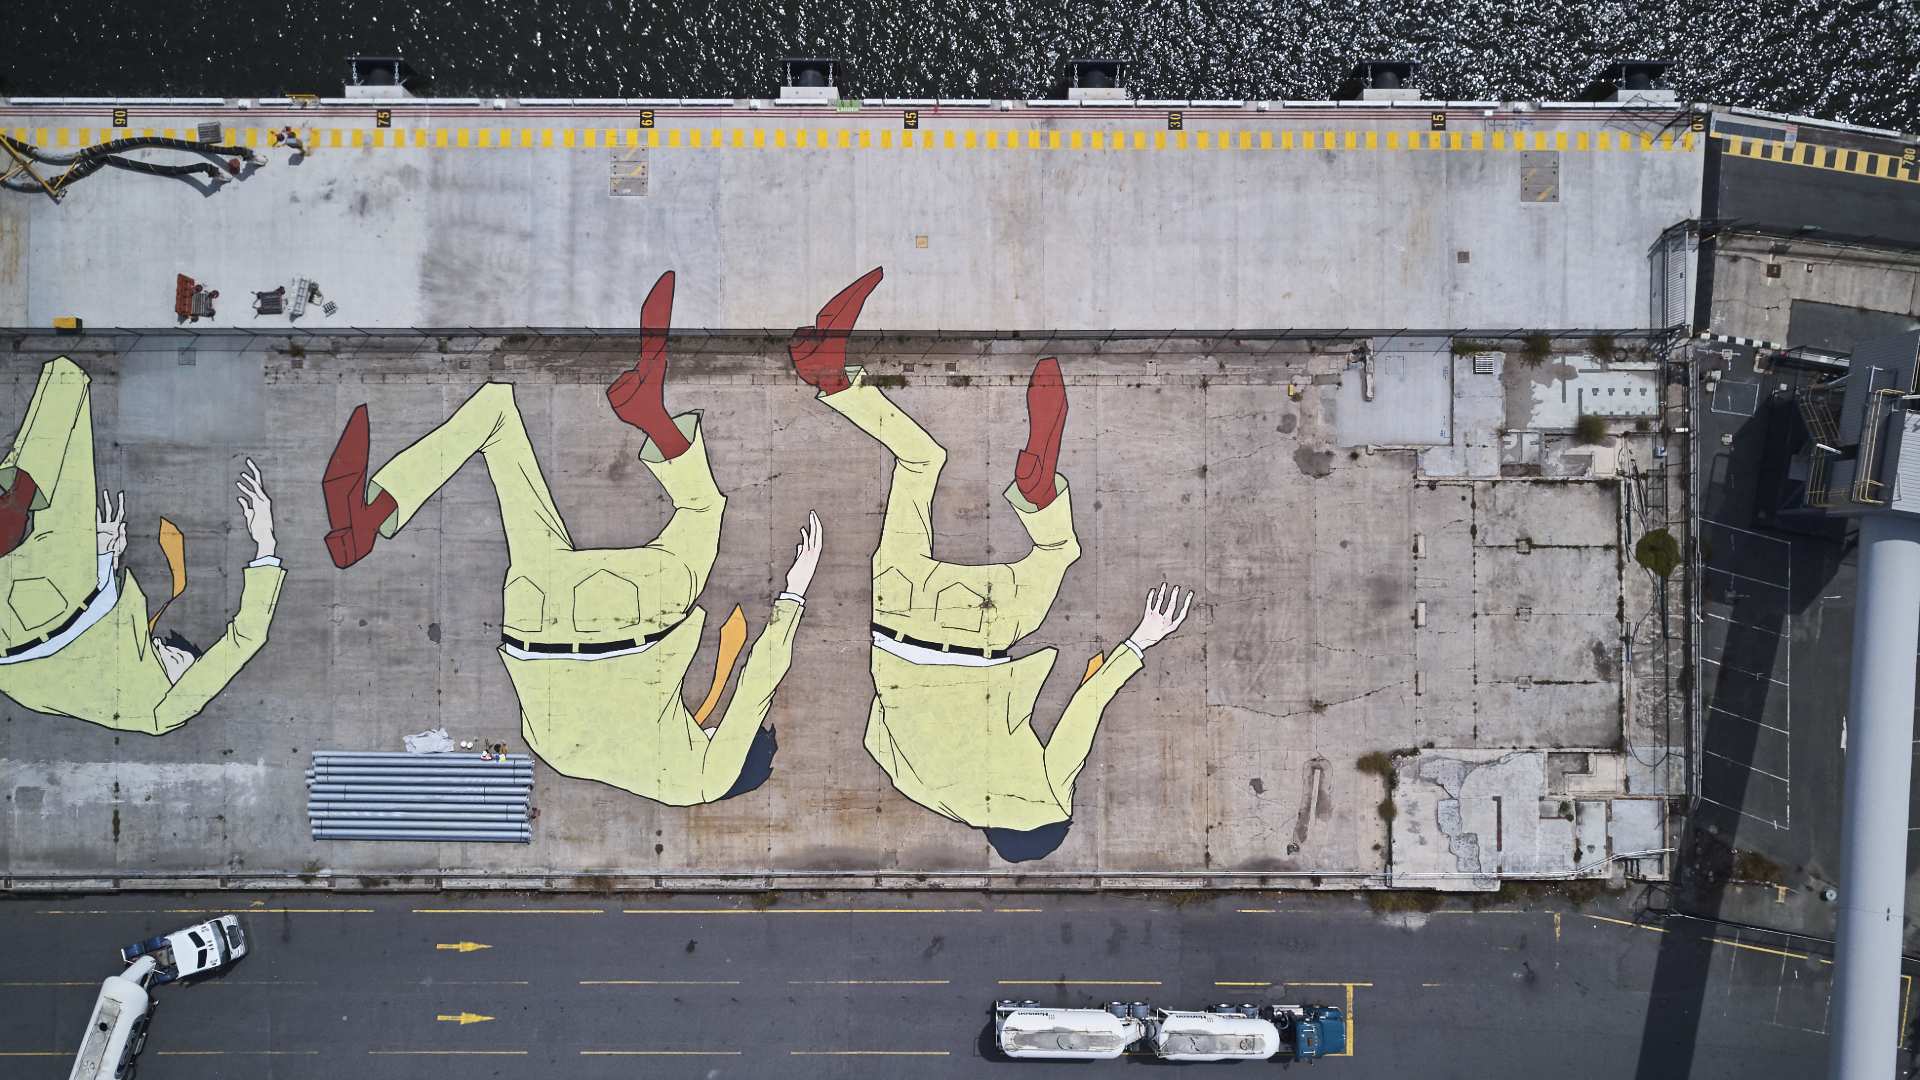 Port Melbourne Is Now Home to the Southern Hemisphere's Largest Mural